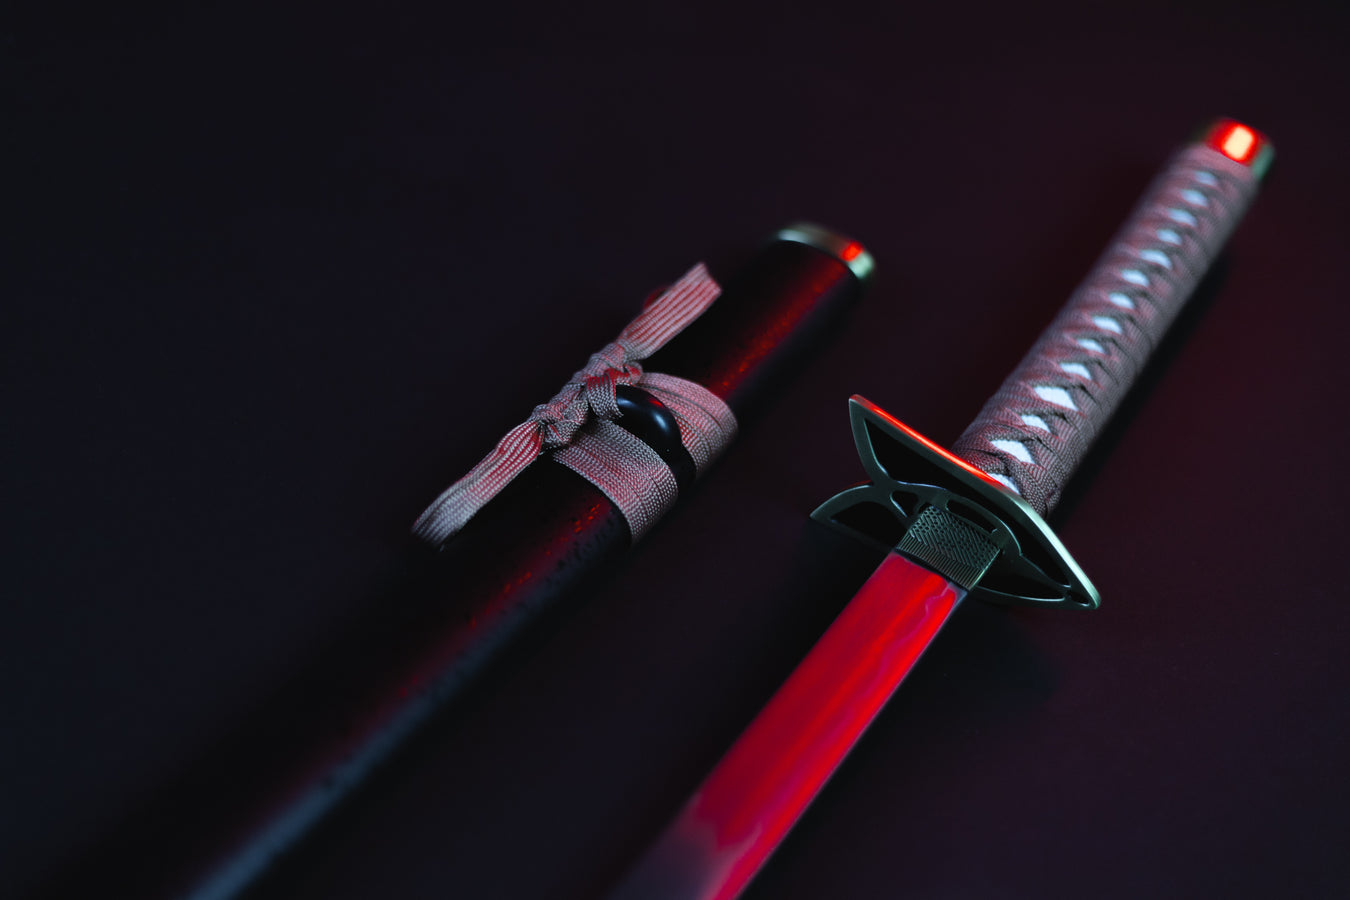 Rangiku's sword from Bleach on a dark background, lit up with a red light.